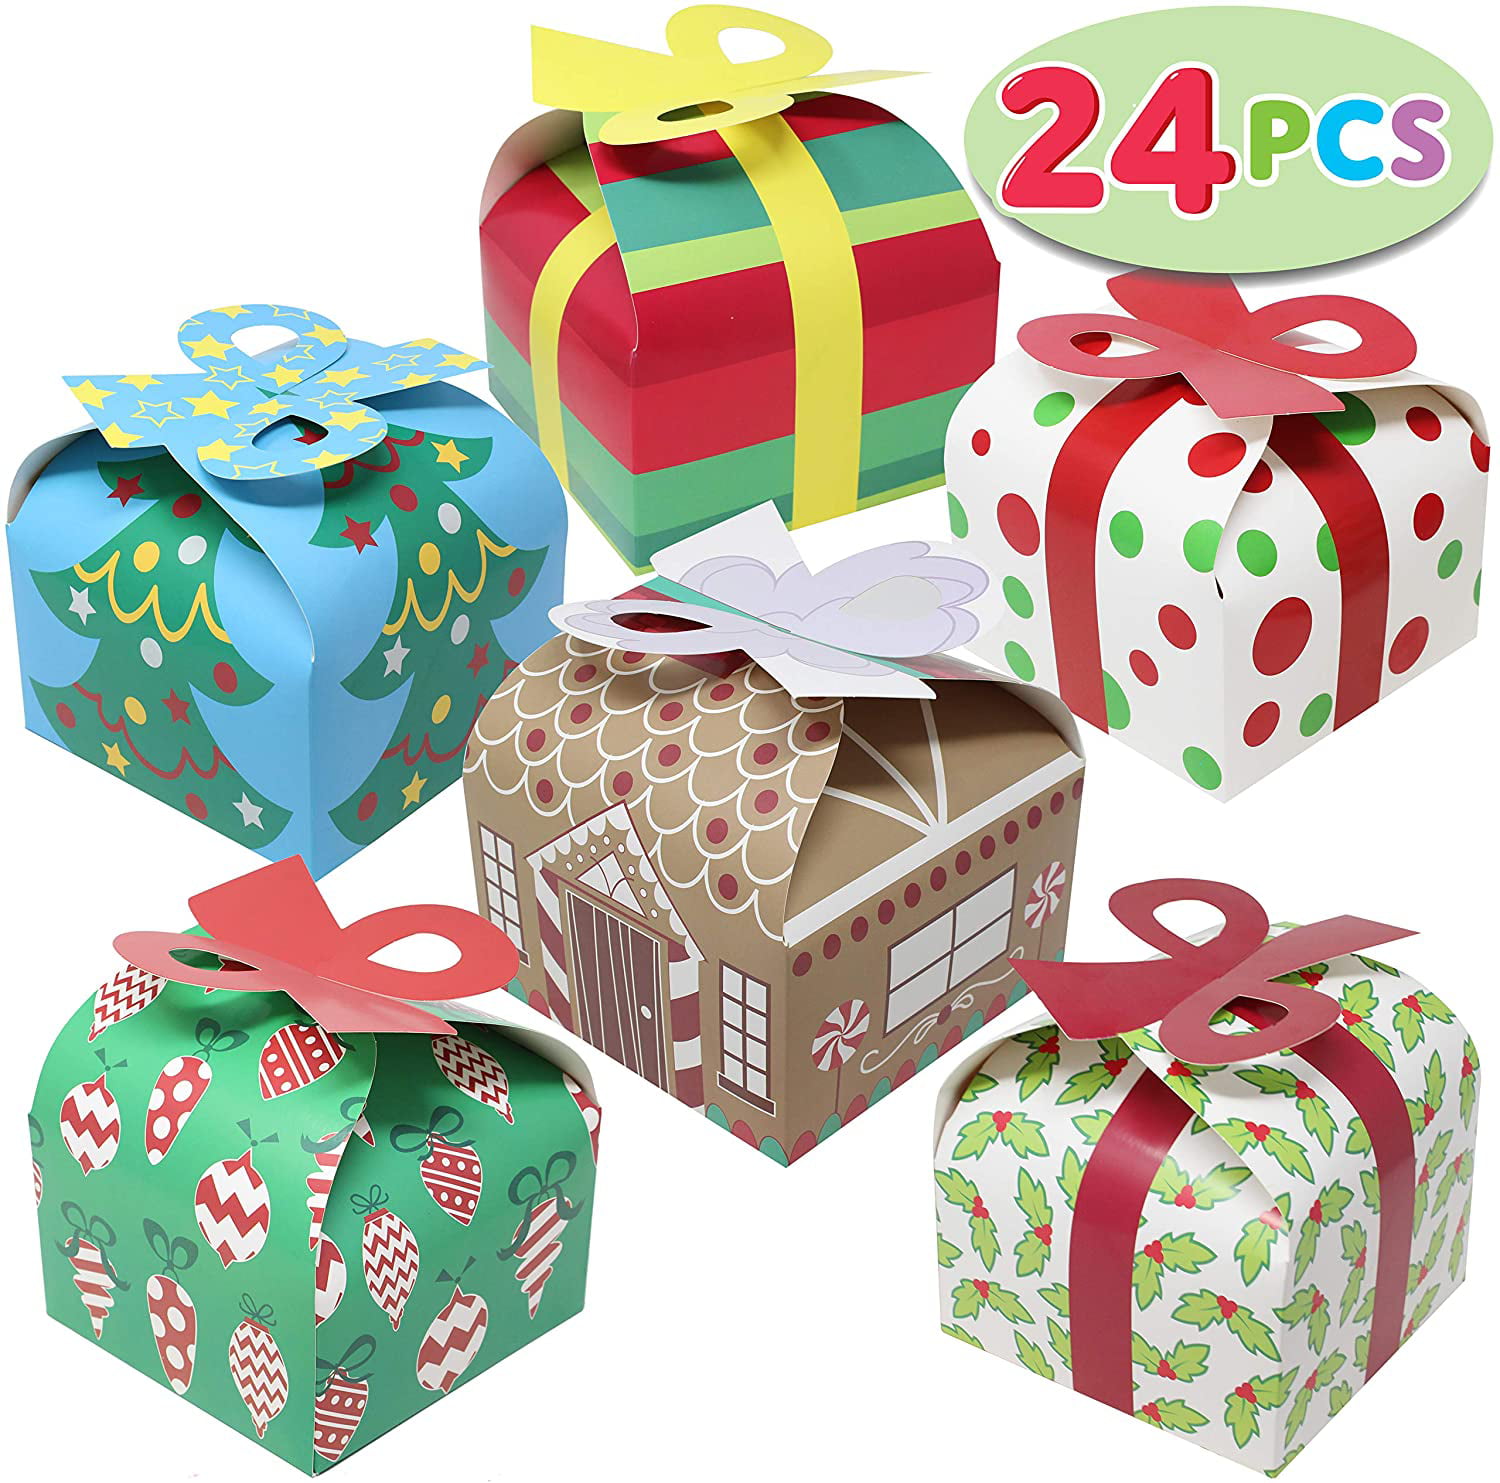 Pastries JOYIN 24 PCs 3D Christmas House Cardboard Treat Boxes for Holiday Treats Cupcakes Brownies Donuts Gift-Giving Goody. 6x 6x3.5 Cookies Goodie